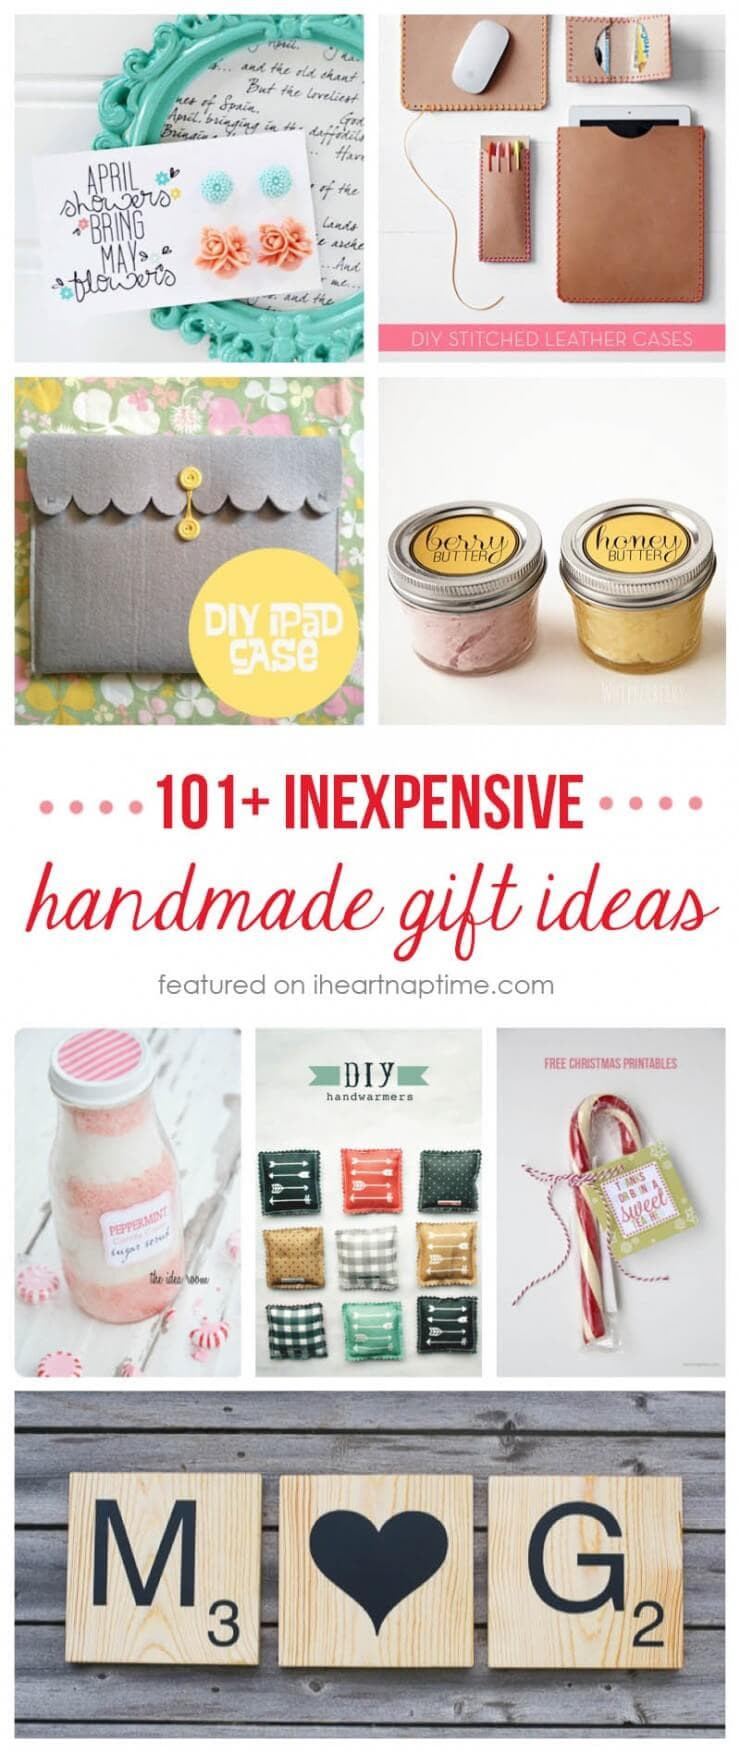 DIY Christmas Present Ideas
 50 homemade t ideas to make for under $5 I Heart Nap Time